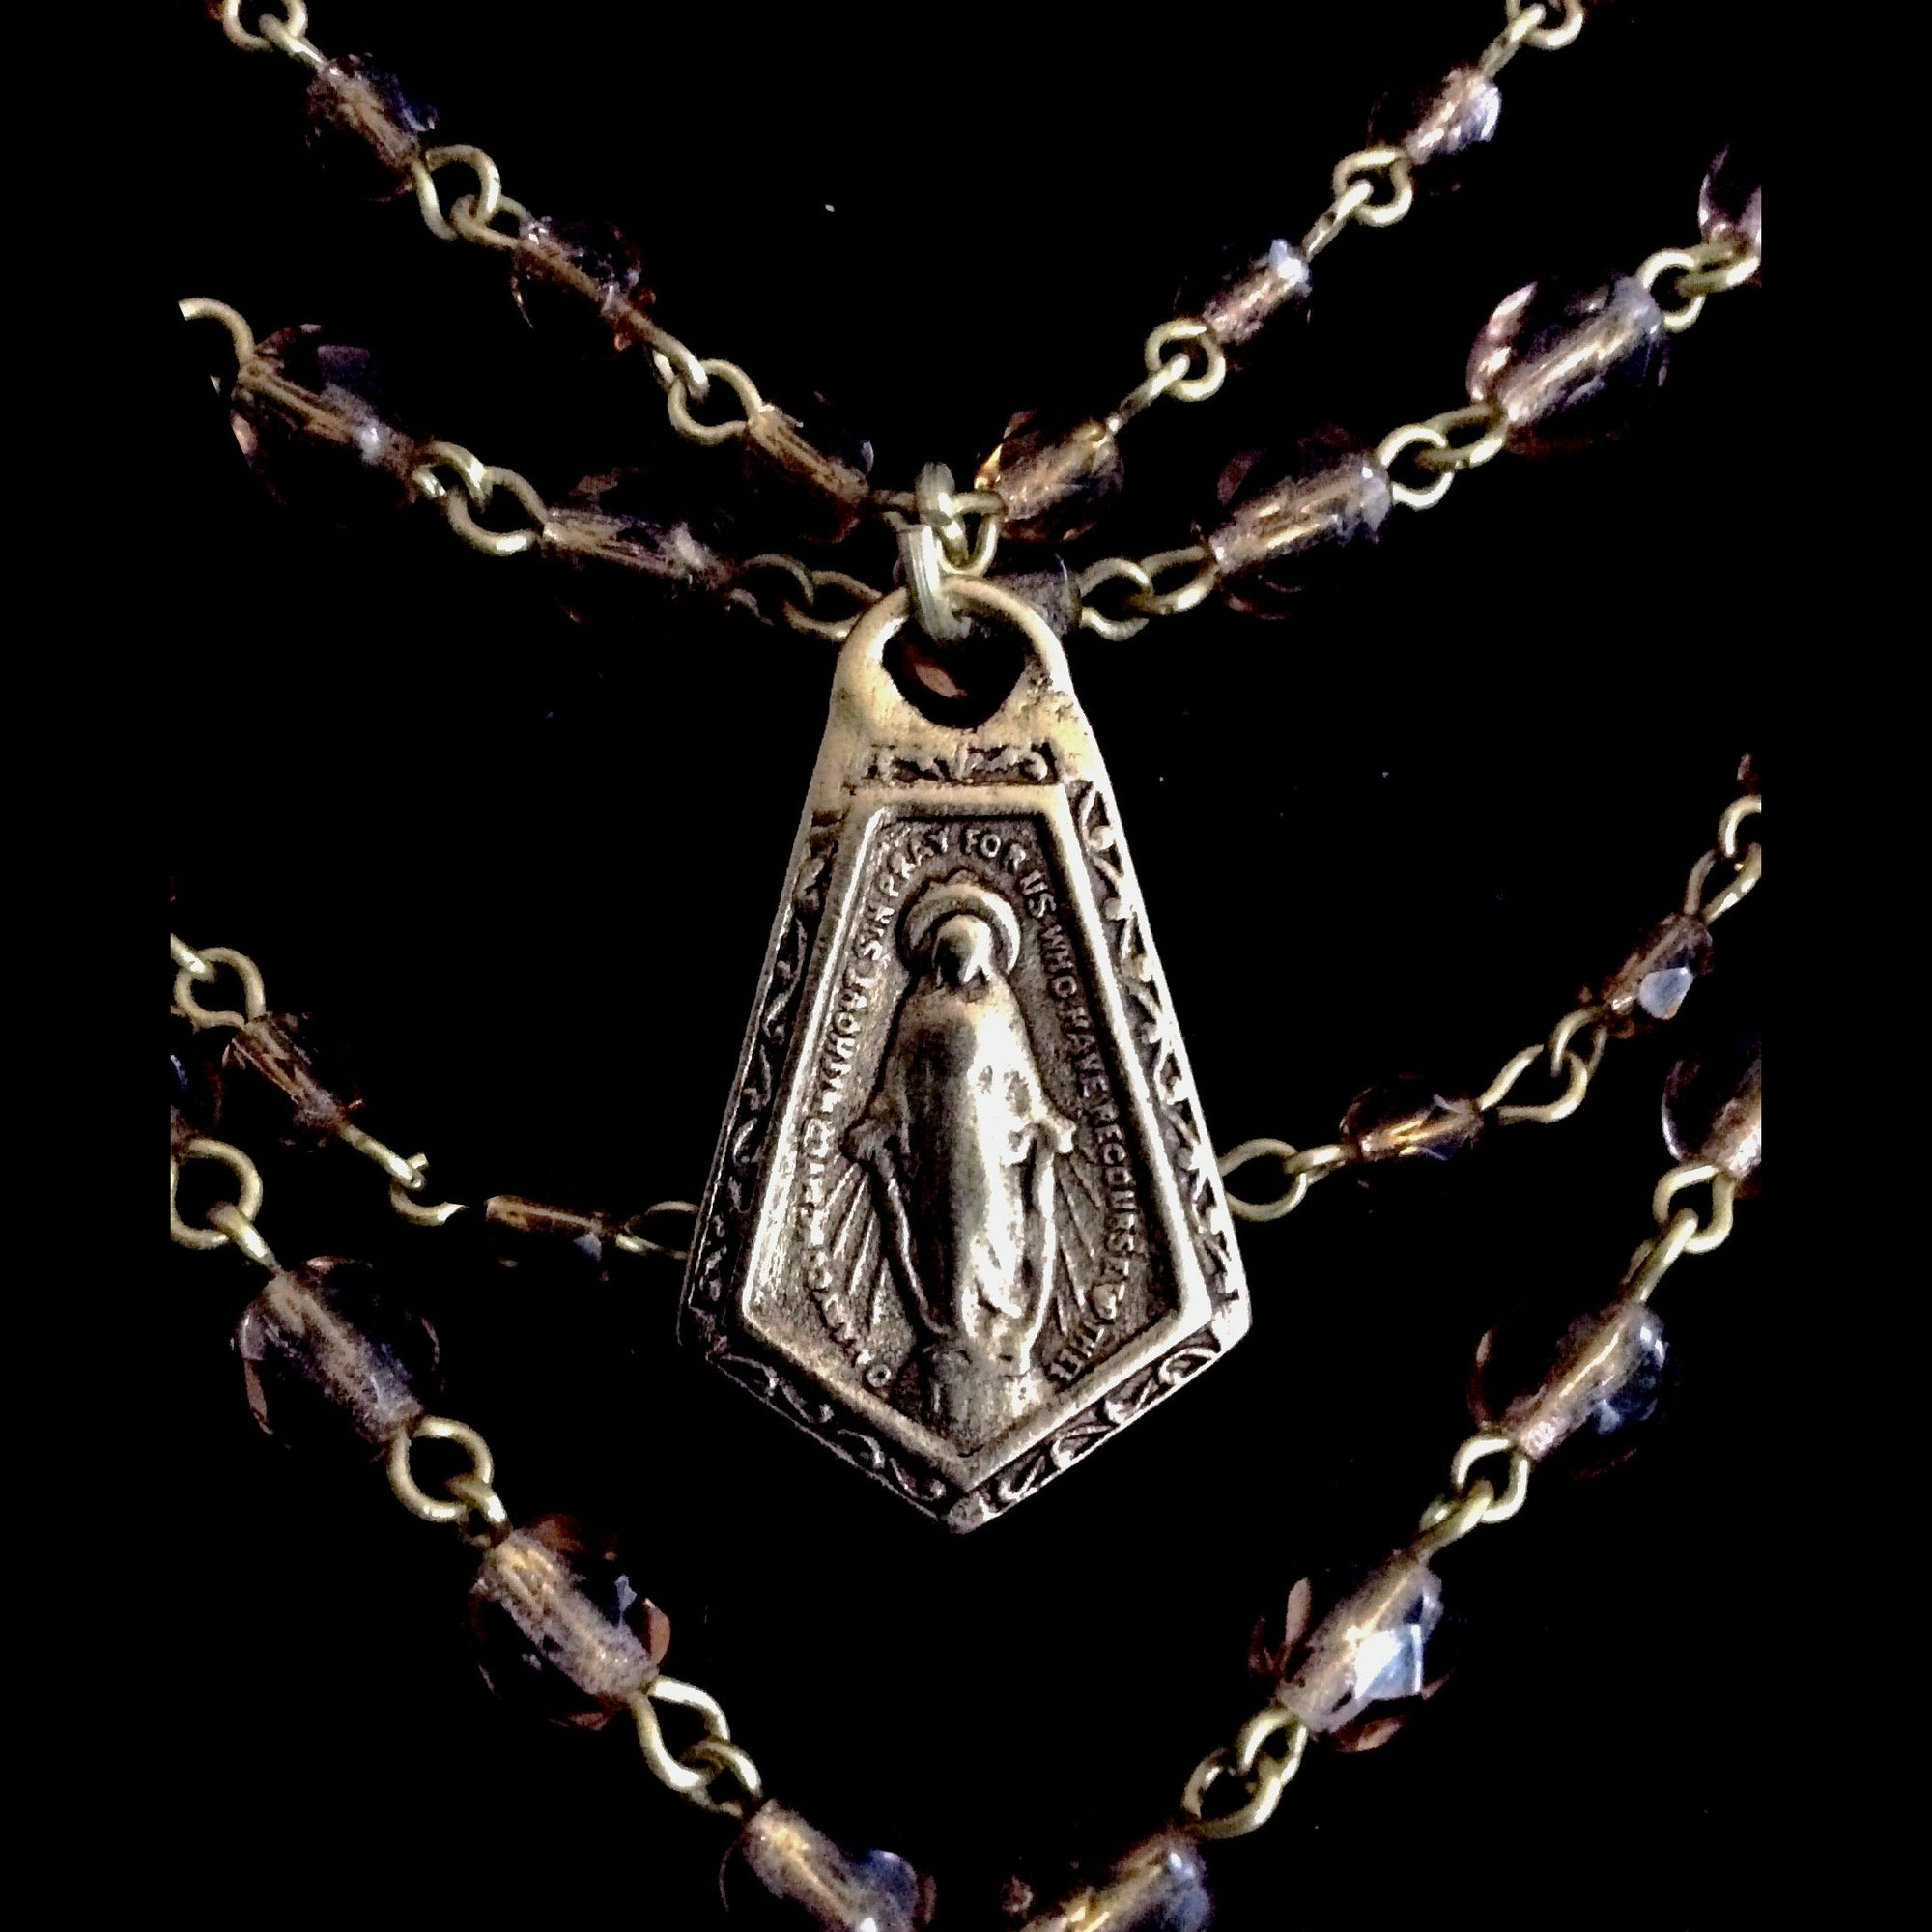 Smokey Topaz Reliquary Cross with Miraculous Medal Multi Strand Necklace by Whispering Goddess